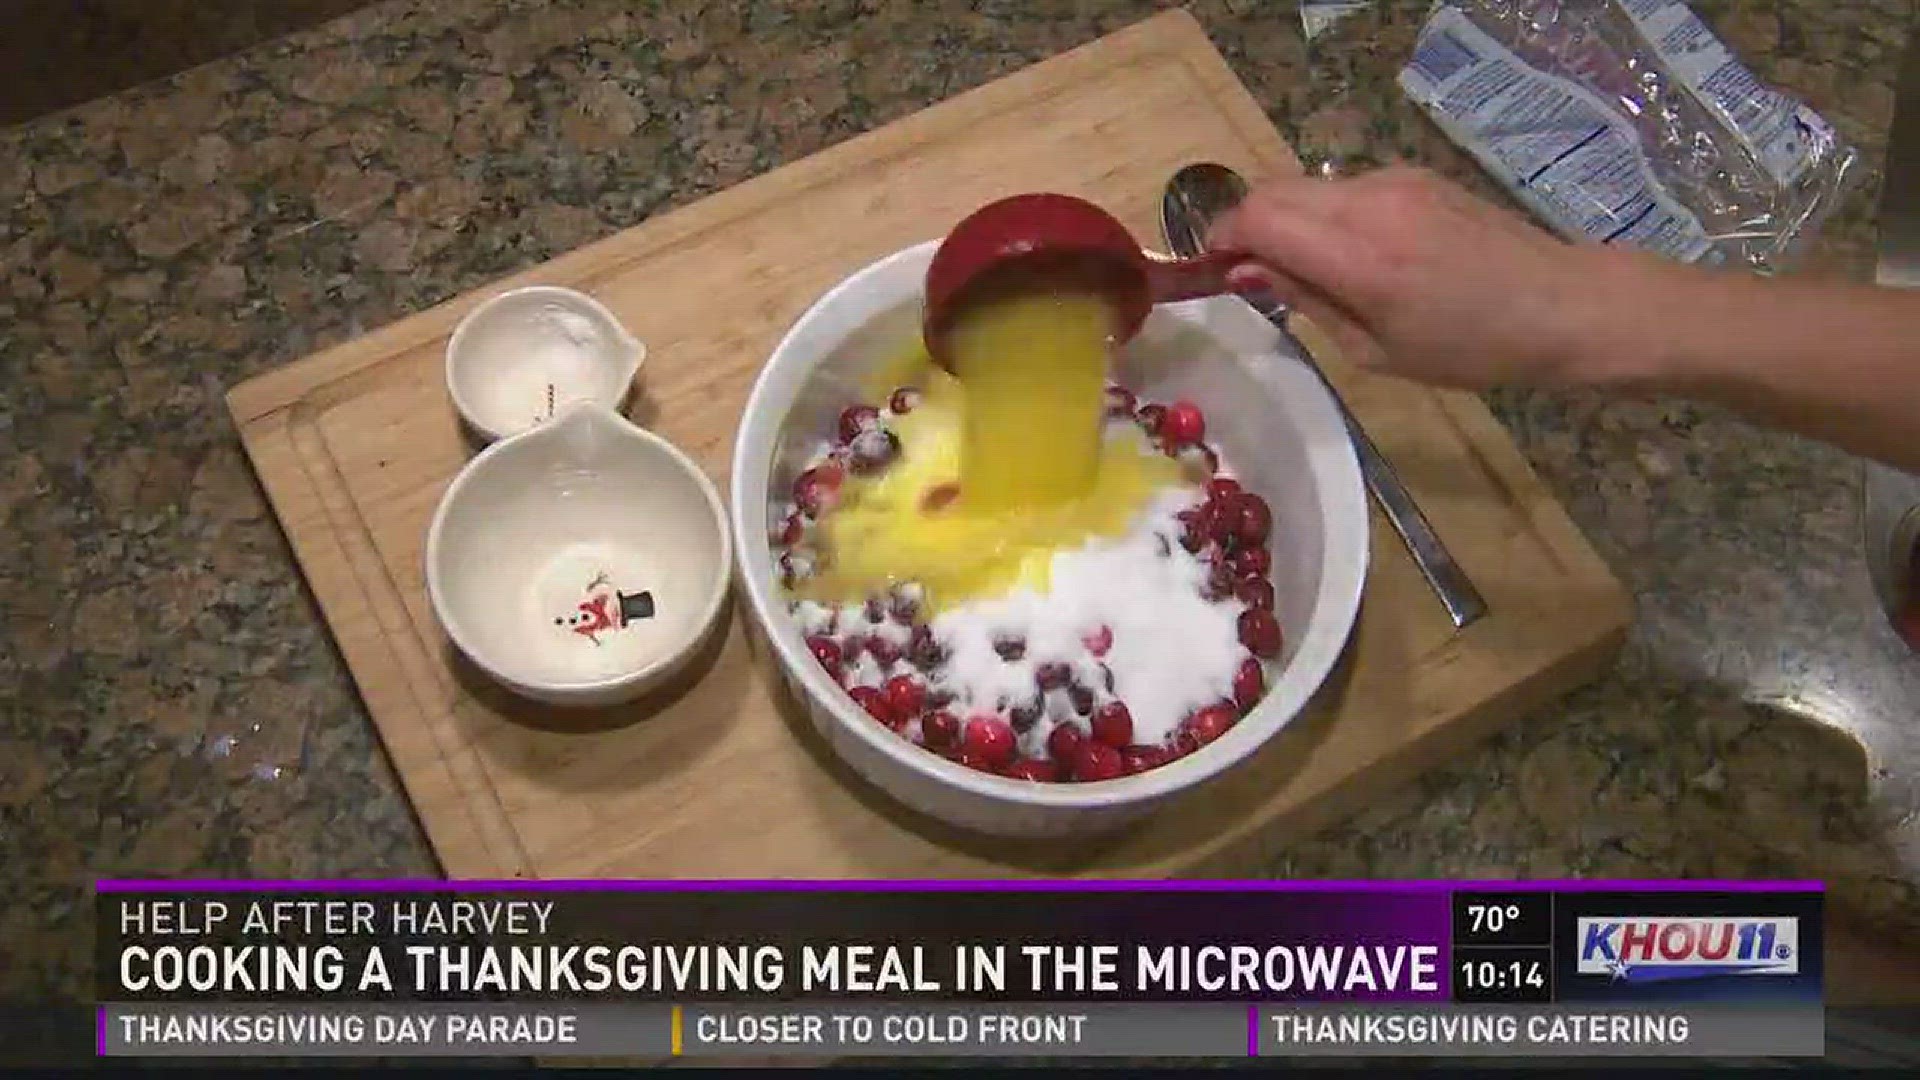 For thousands of families across Houston still recovering from Harvey, Thanksgiving will likely be a little different this year, especially for those who still don't have a kitchen. However, many of the holiday favorites can be cooked simply using a micro